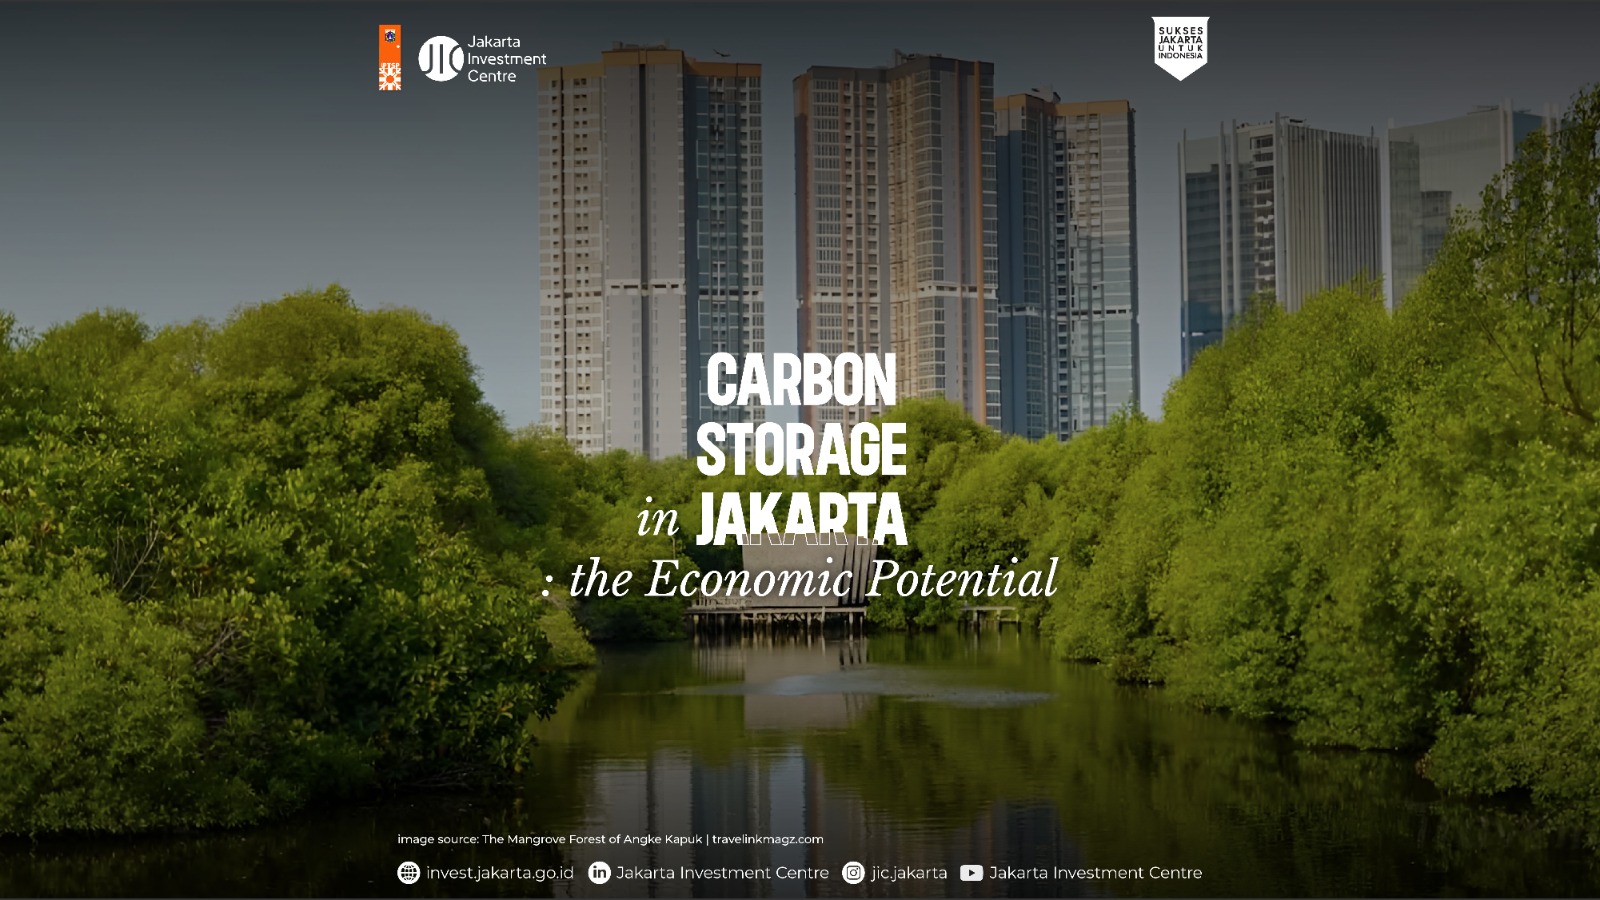 Carbon Storage in Jakarta: The Economic Potential